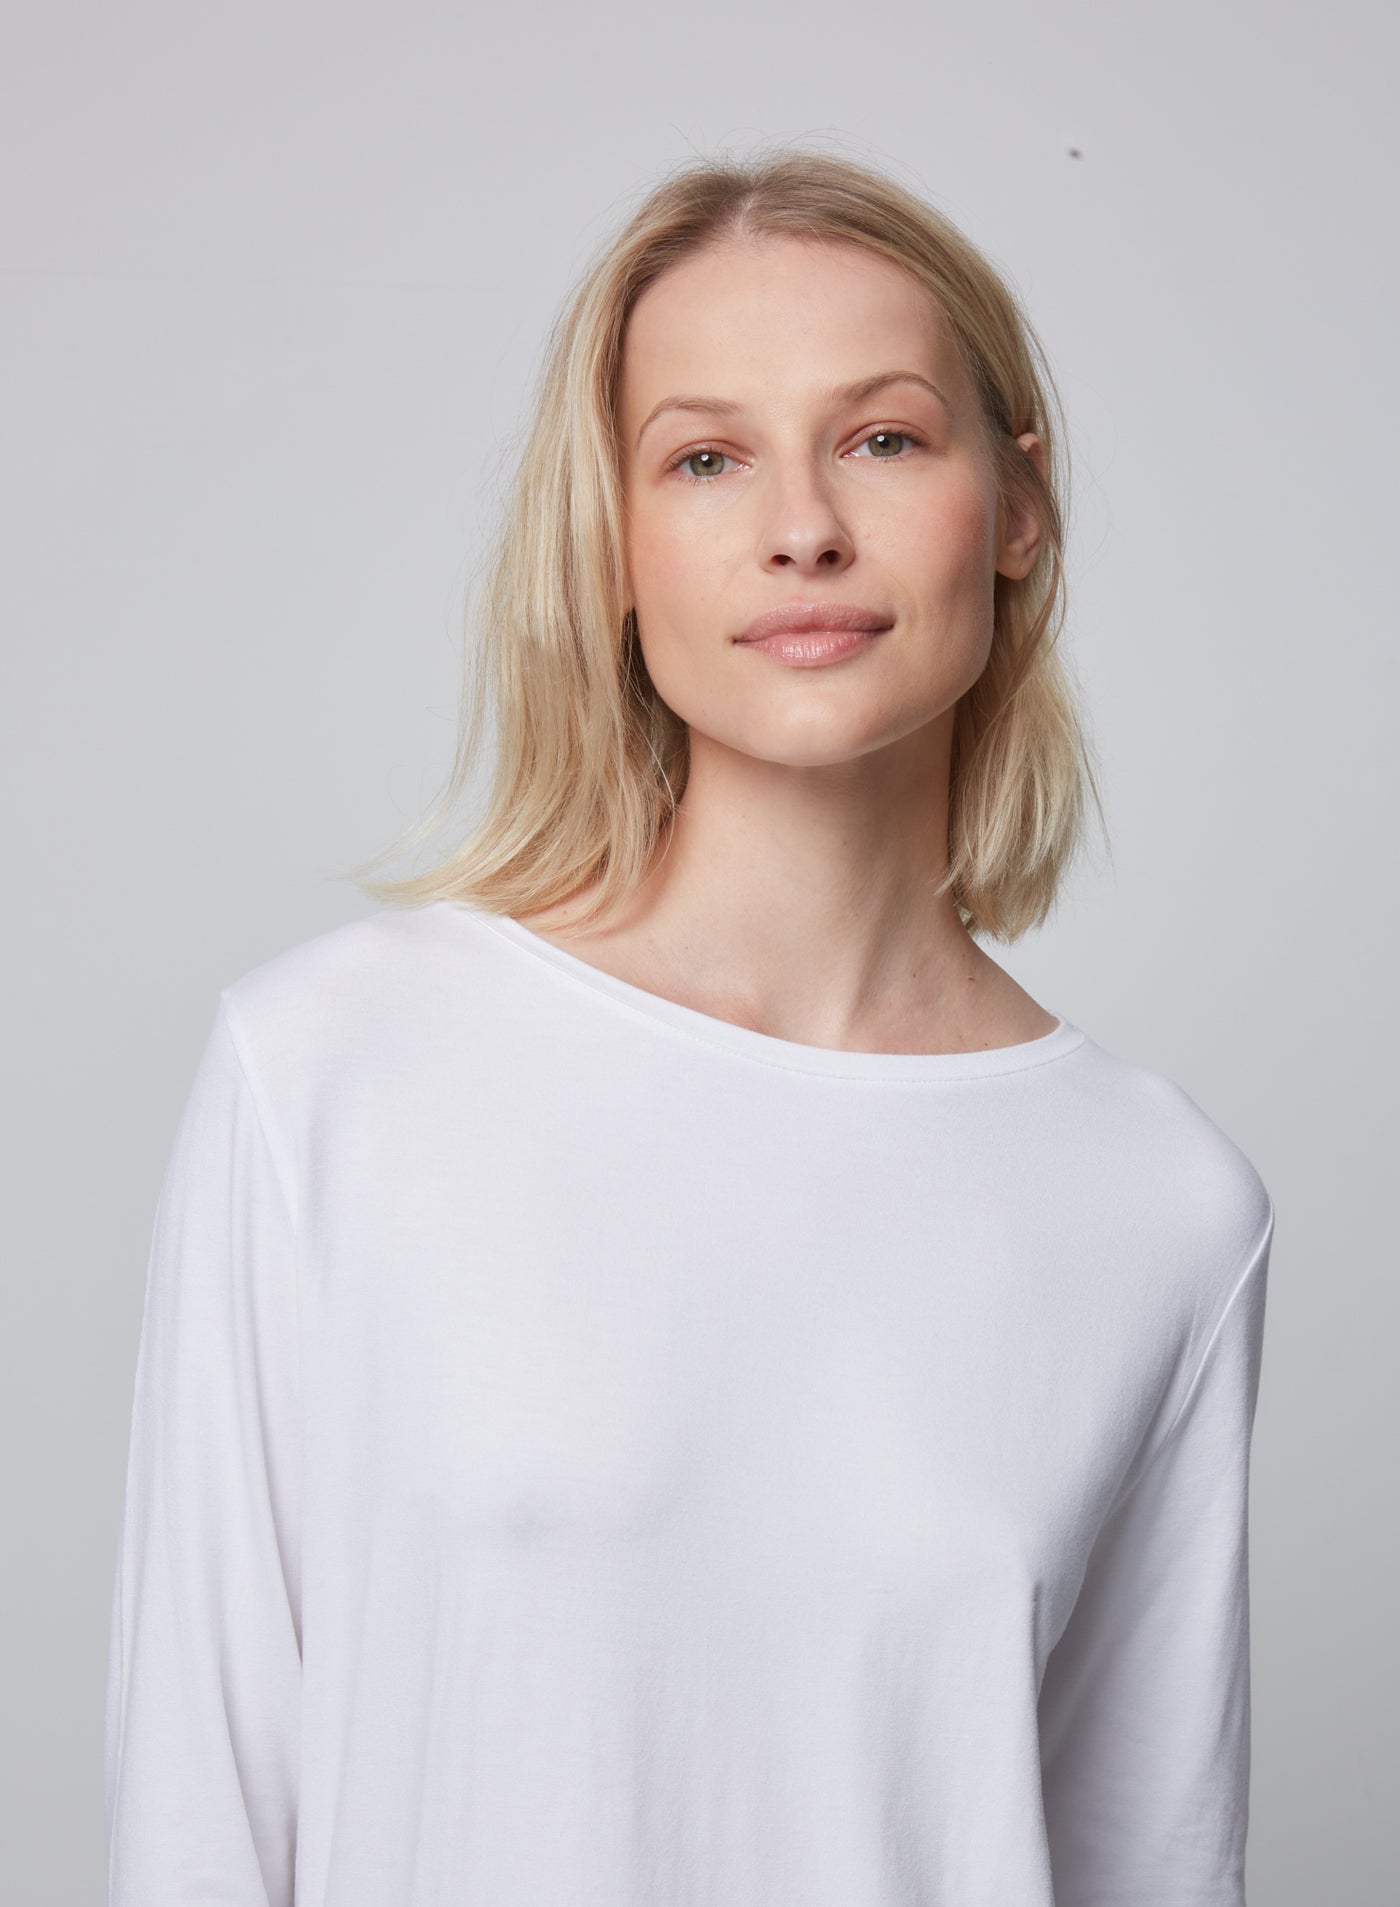 3/4 Boat Neck Top